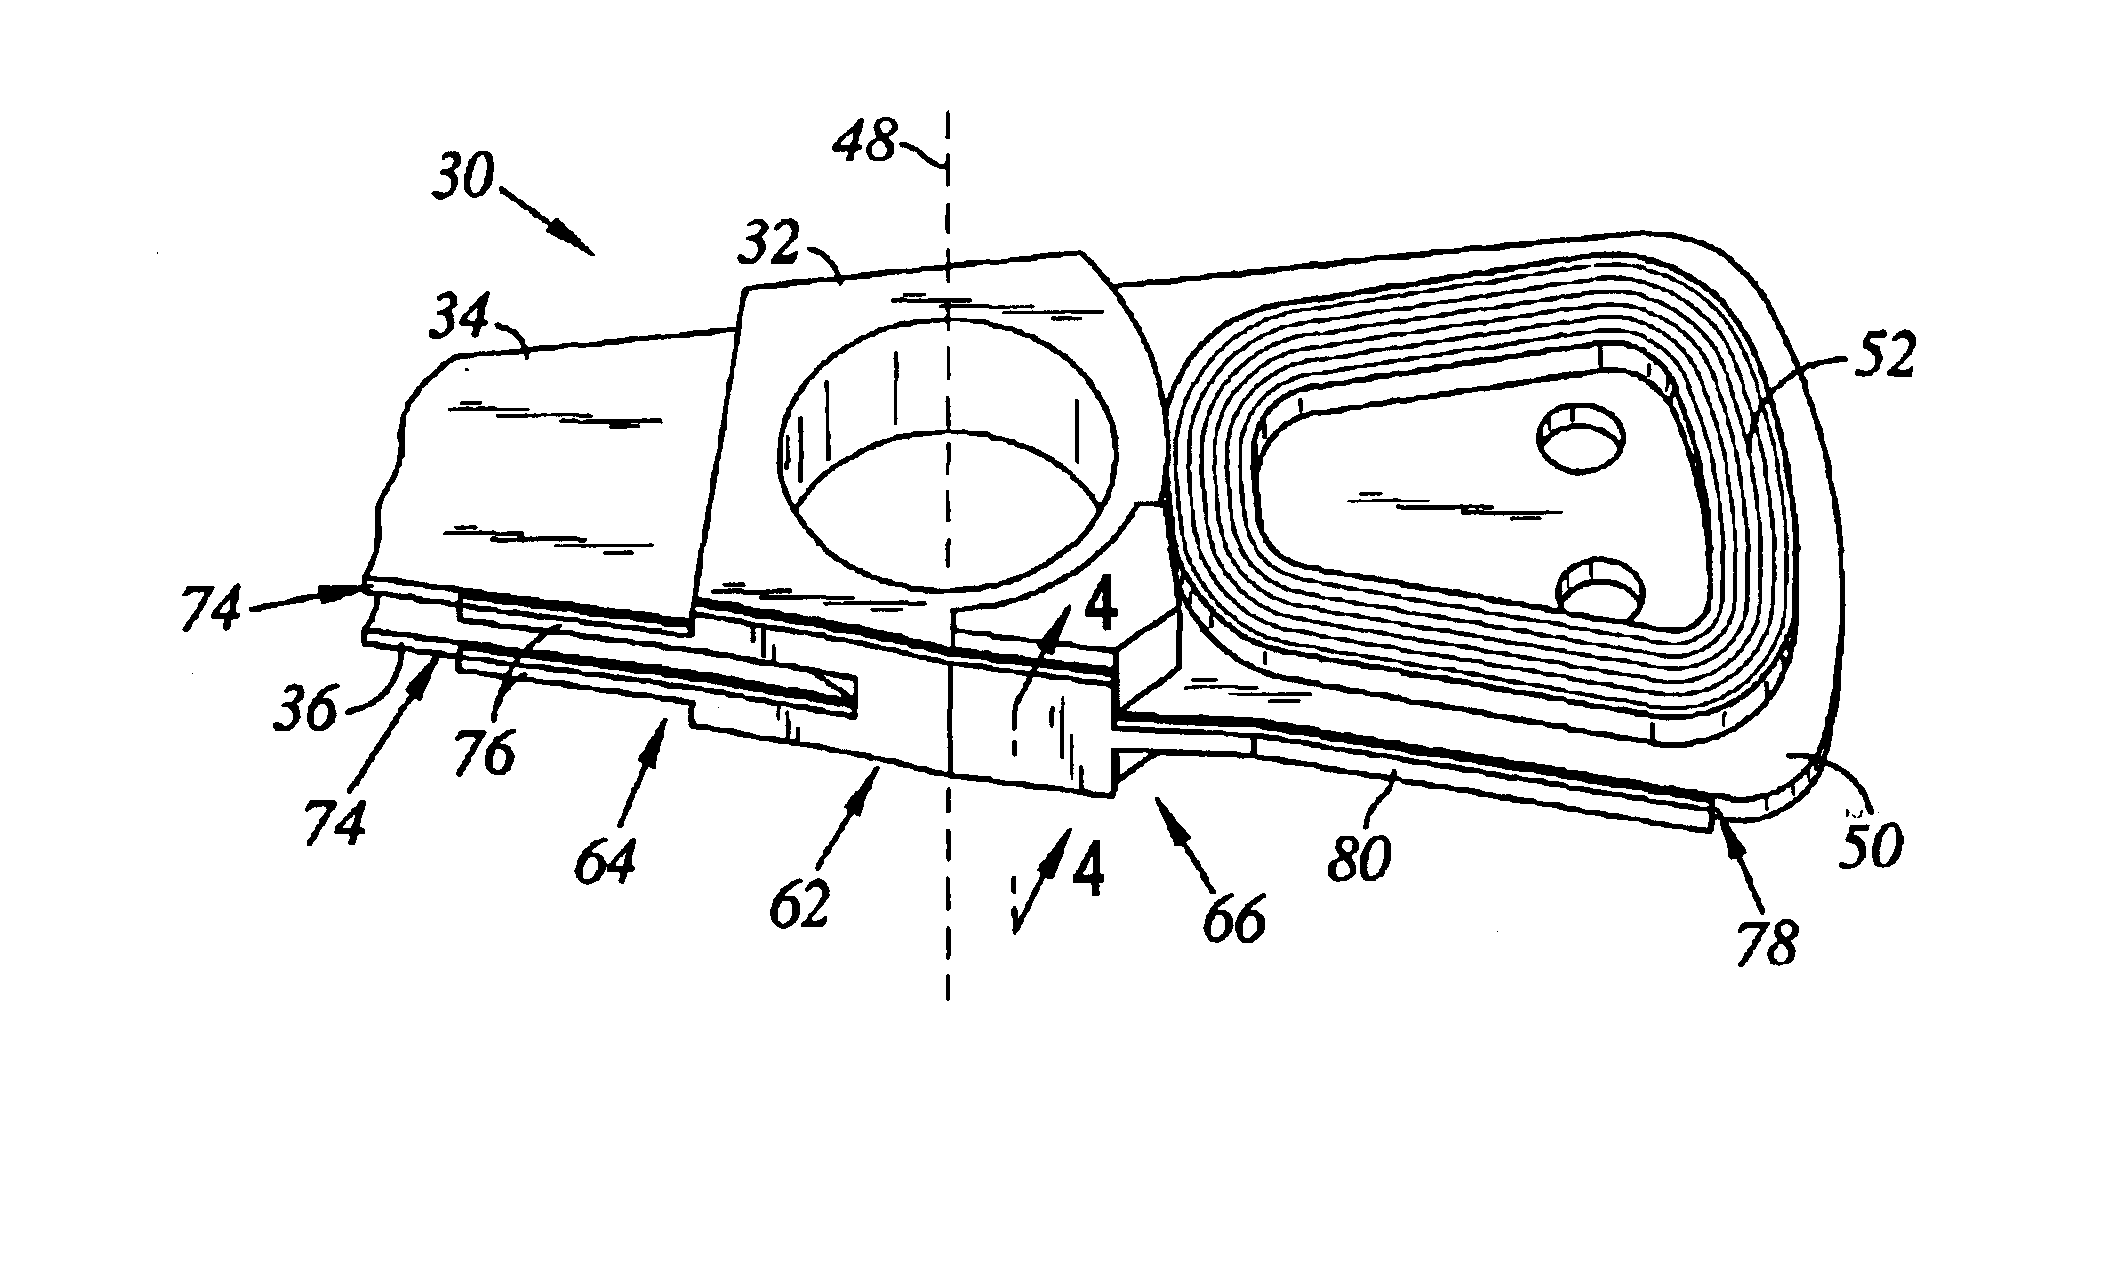 Disk drive including an actuator with a constrained layer damper disposed upon an actuator body lateral surface